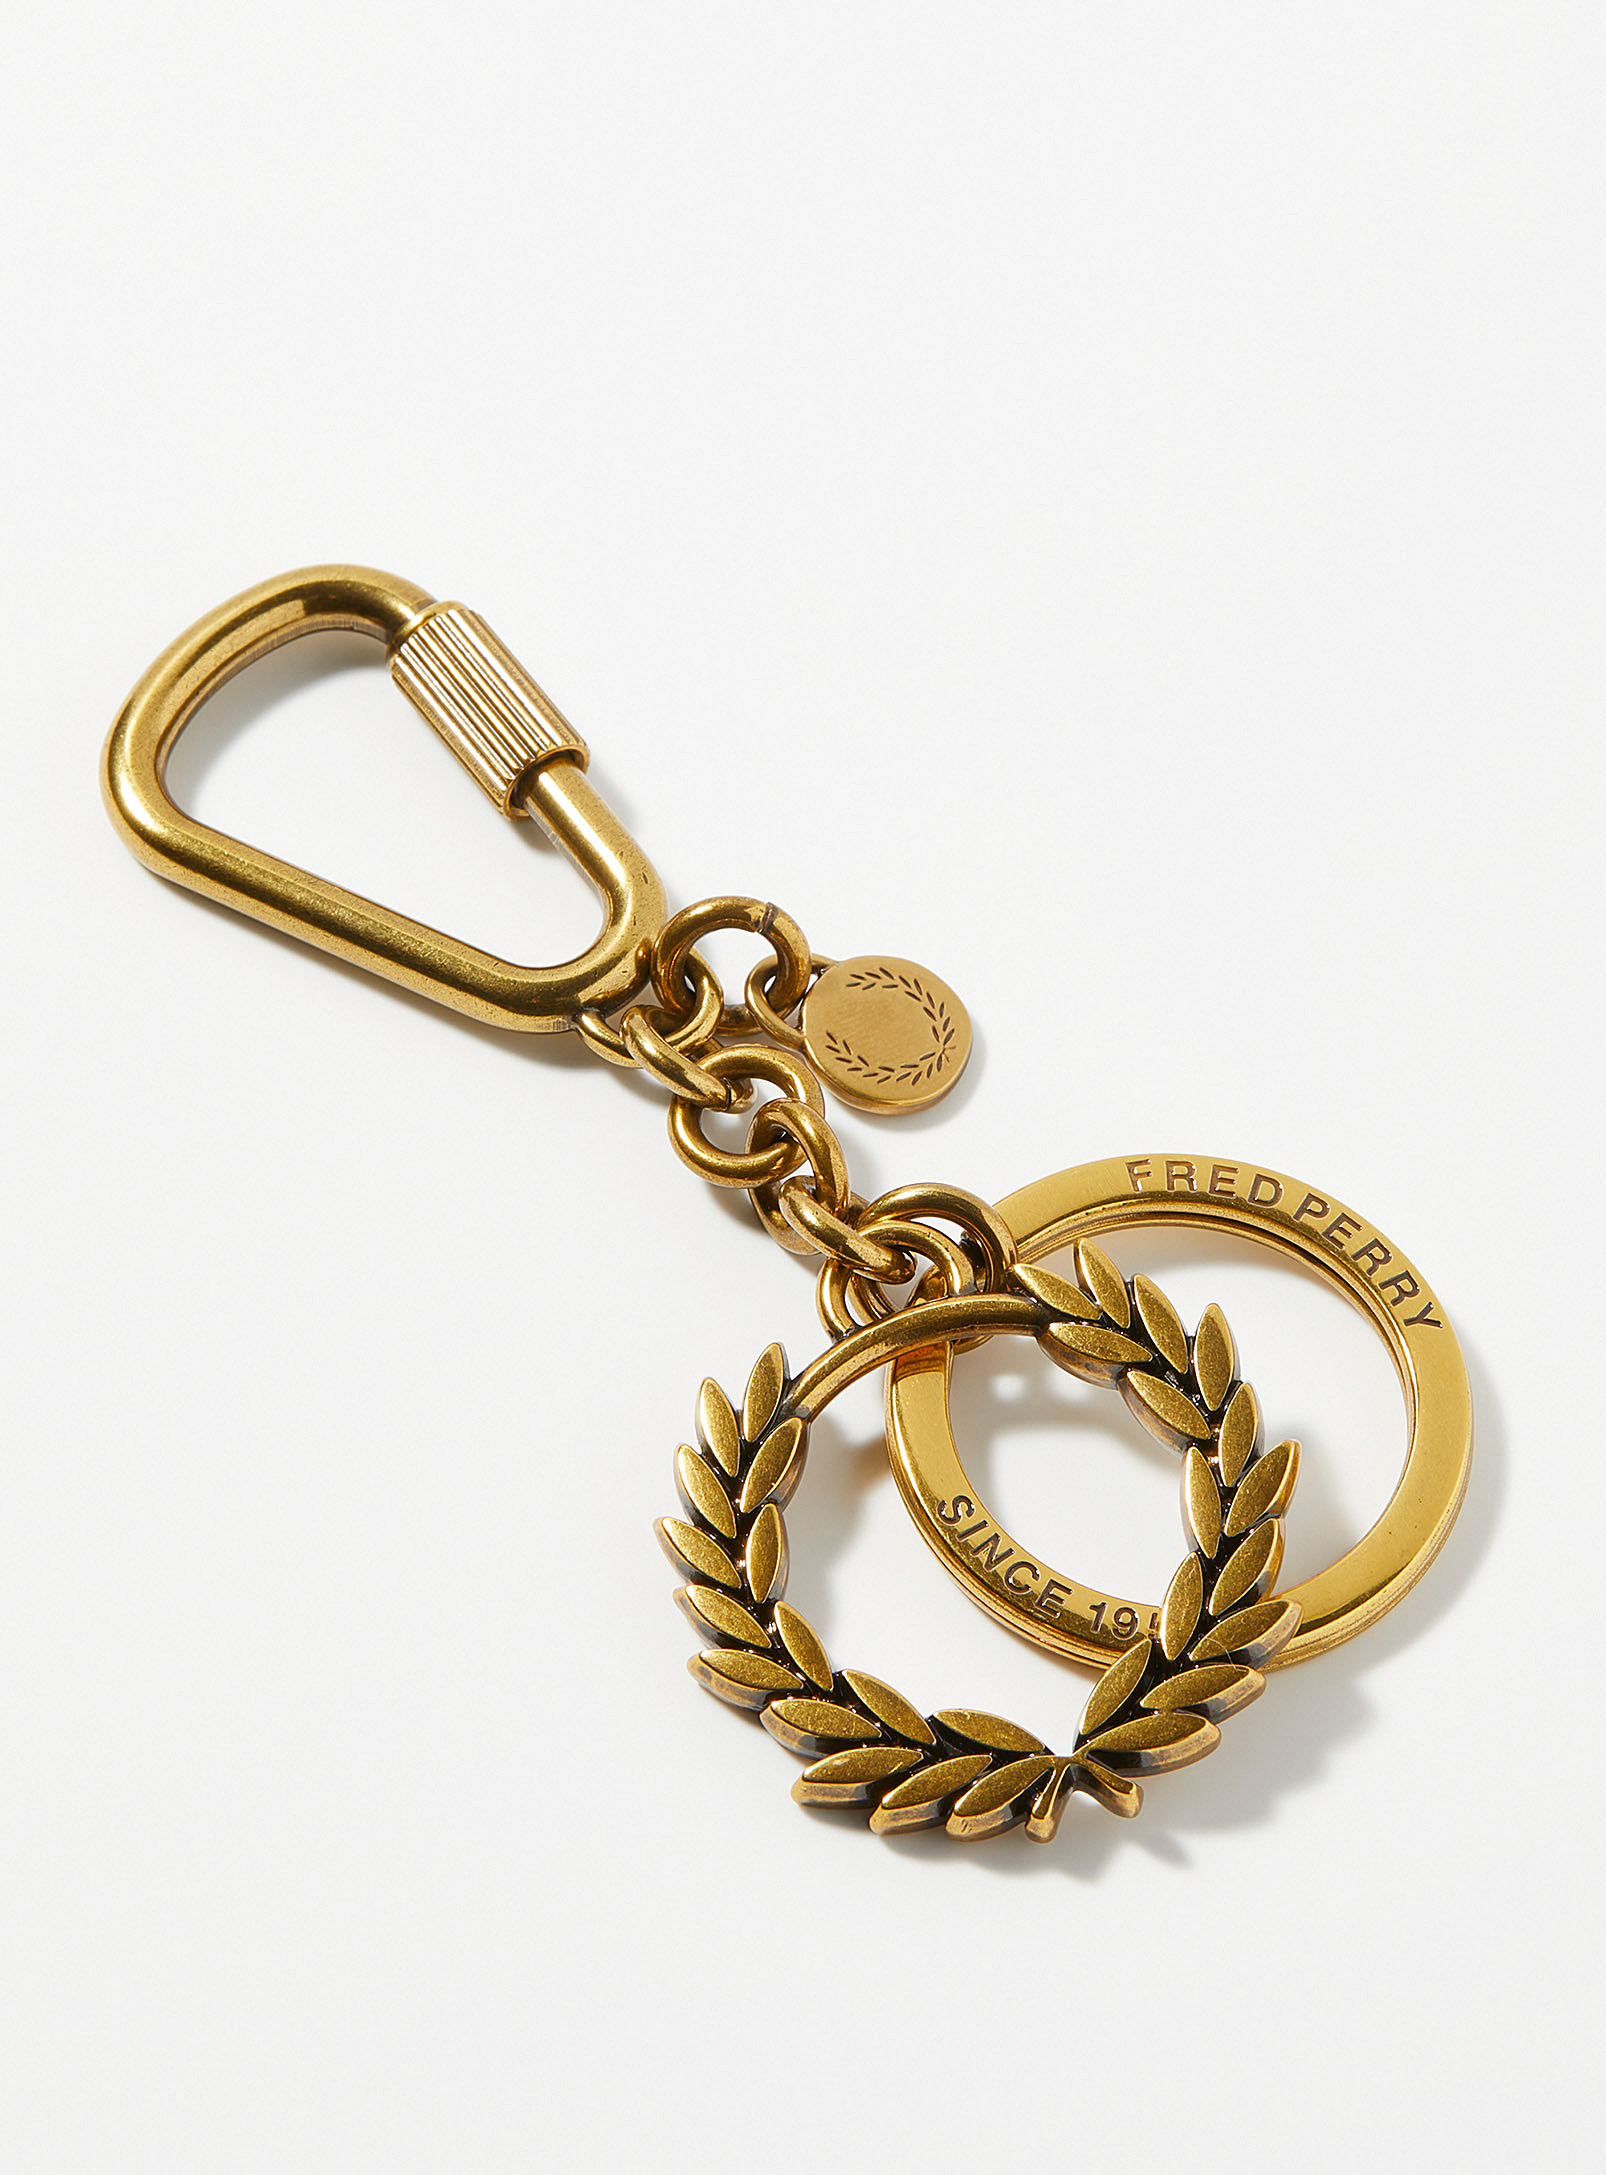 FRED PERRY LAUREL KEYCHAIN